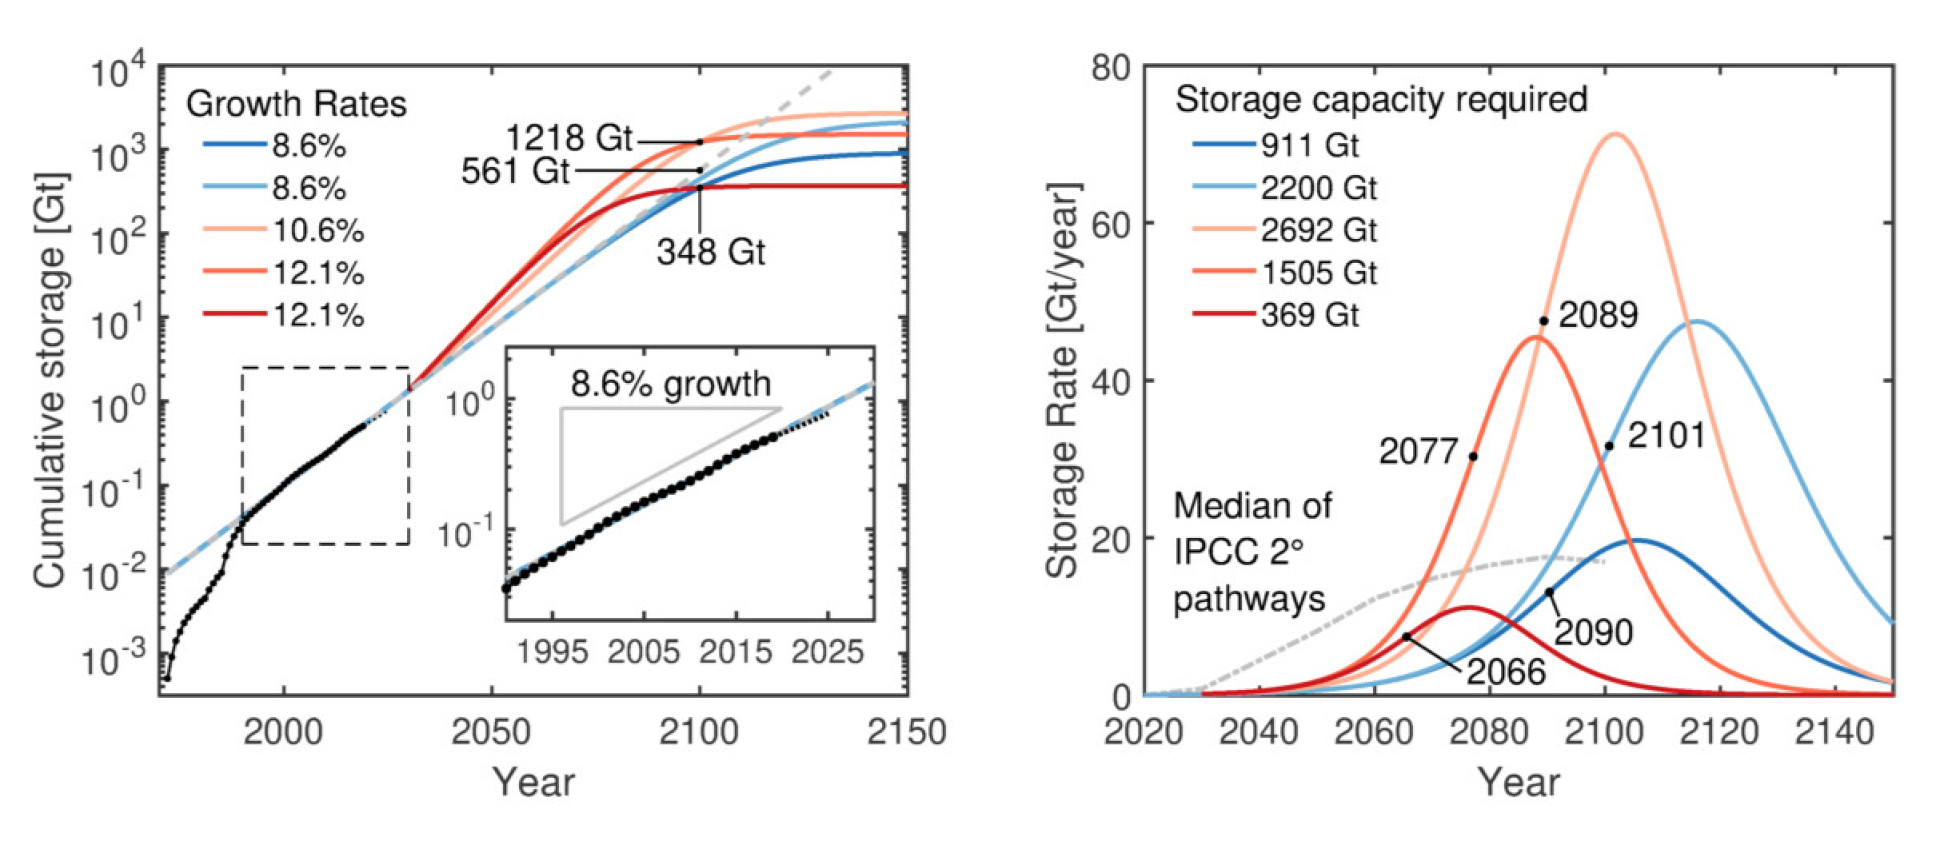 Growth trajectories for the scaleup of CO2 storage